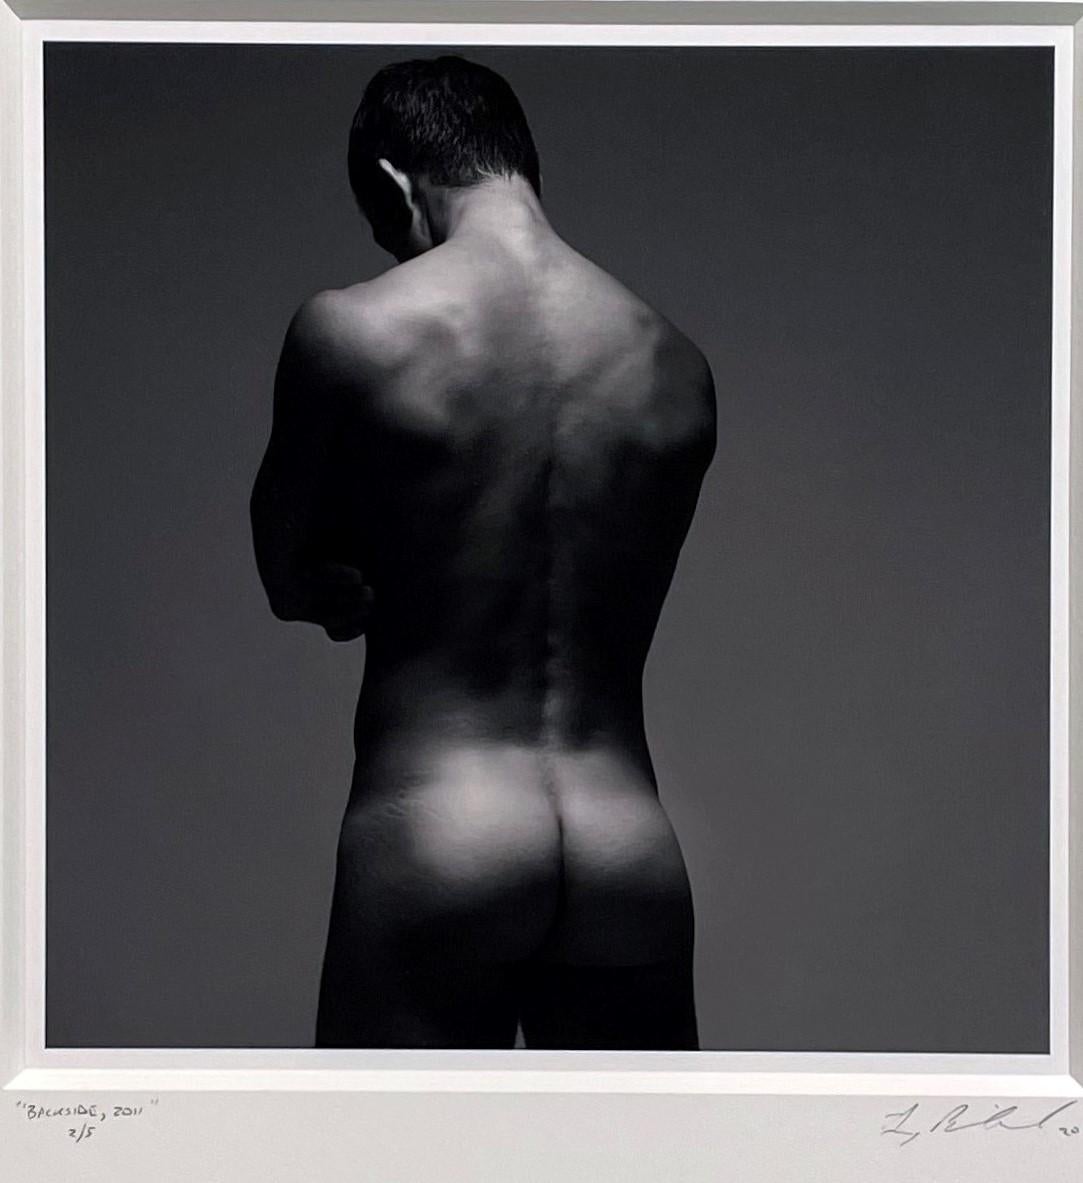 The gorgeous muscular physique of the nude male in Doug Birkenheuer's photograph titled 